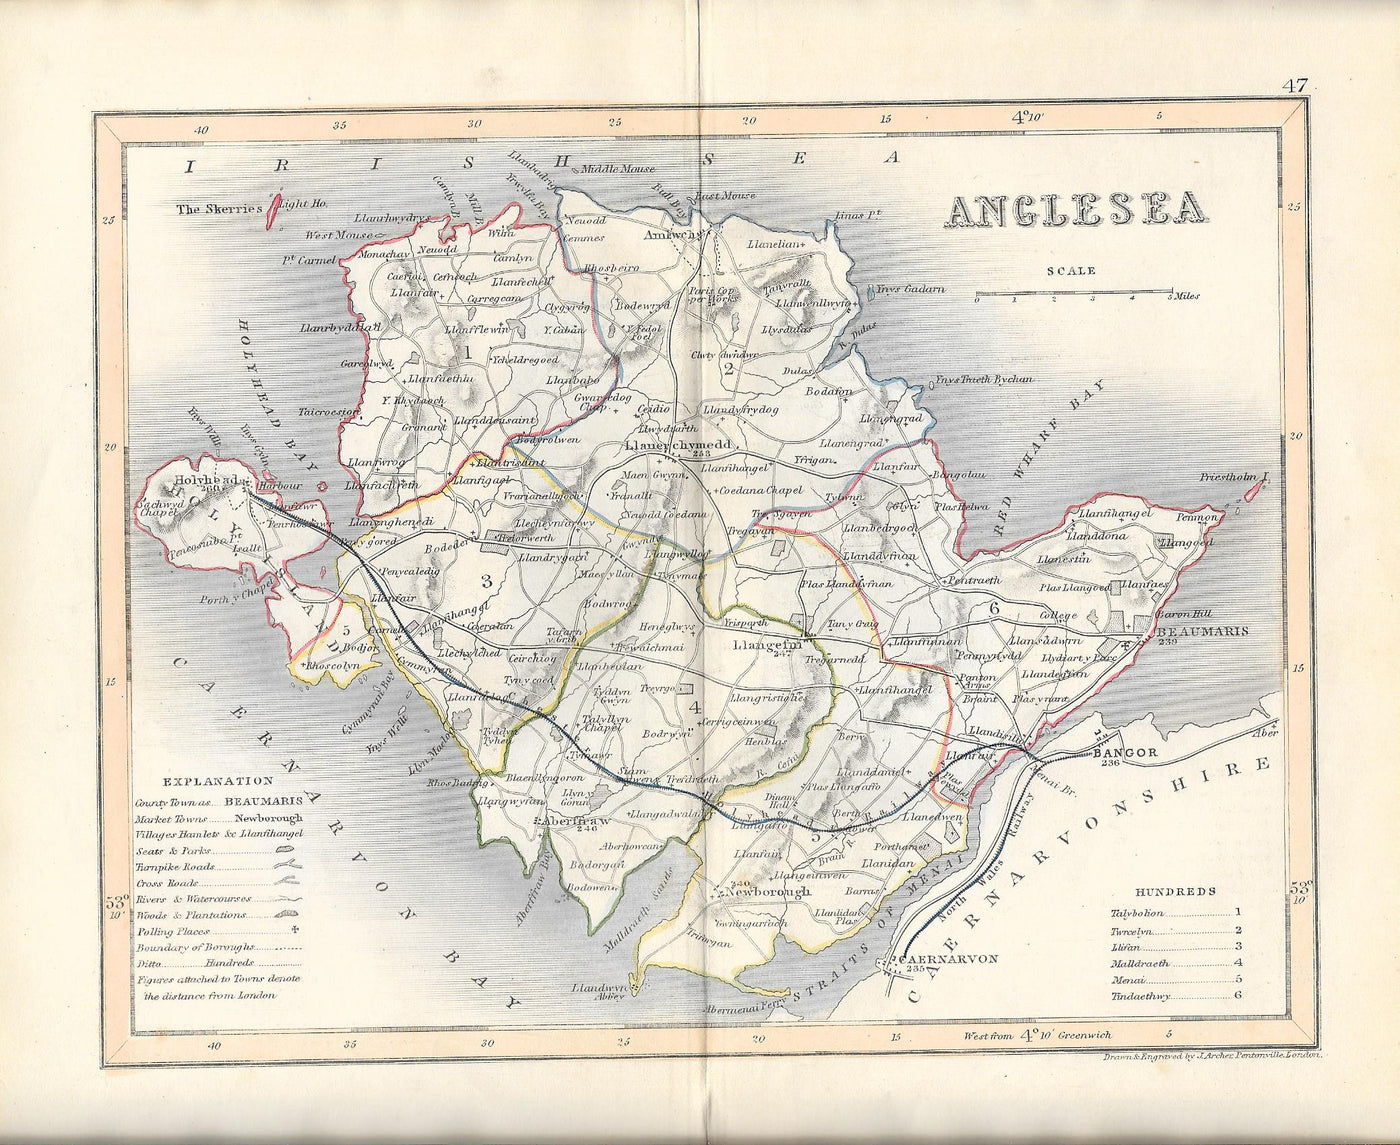 Anglesey Anglesea Wales Cymru antique map